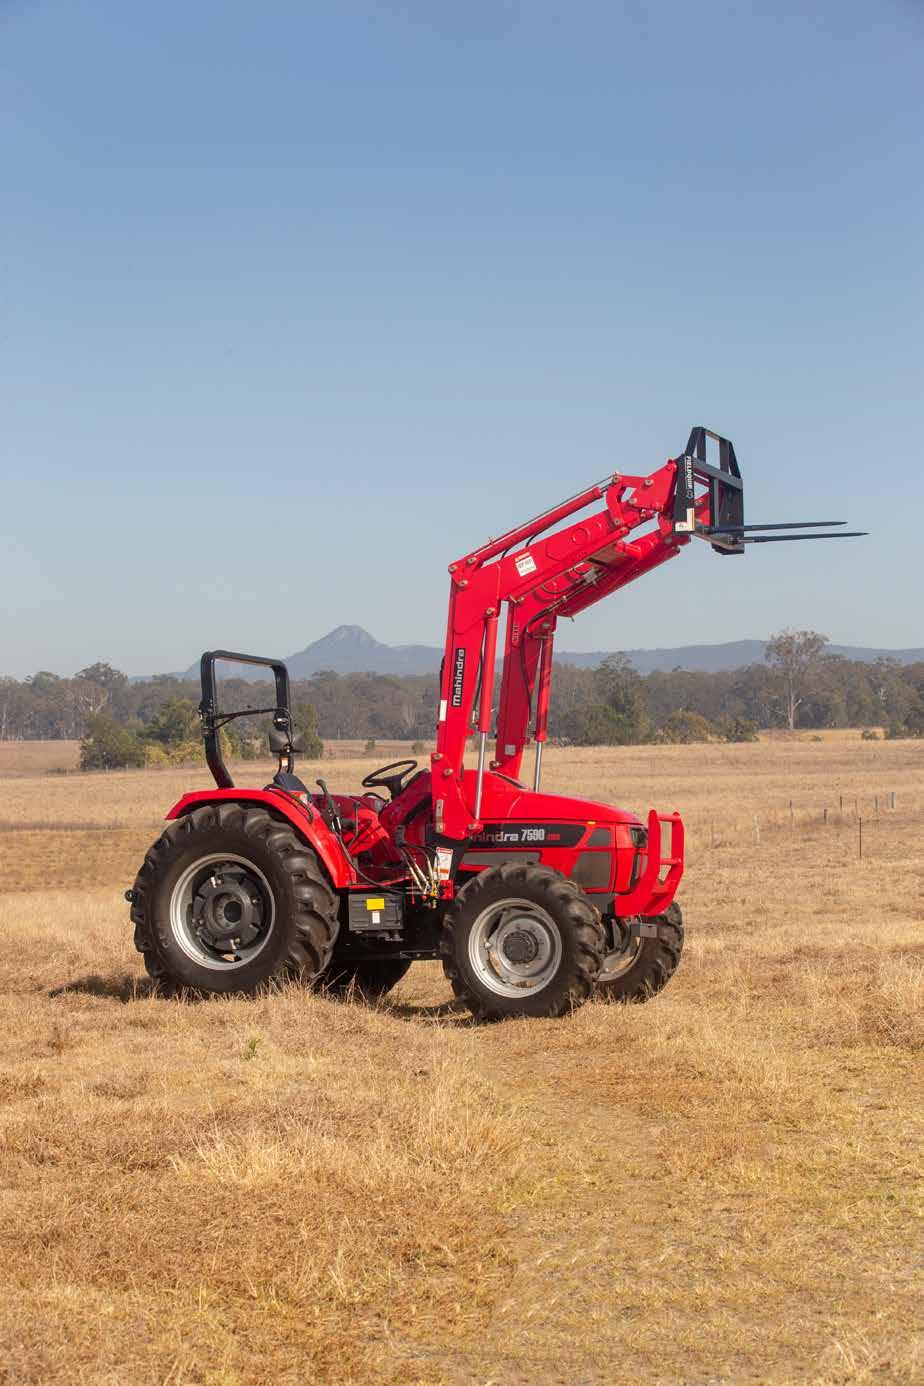 The 7580/7590-4WD series tractors are ideal for primary and secondary tillage, livestock operations, crop protection, mowing, slashing, haulage, loader applications and other basic chores on the farm.